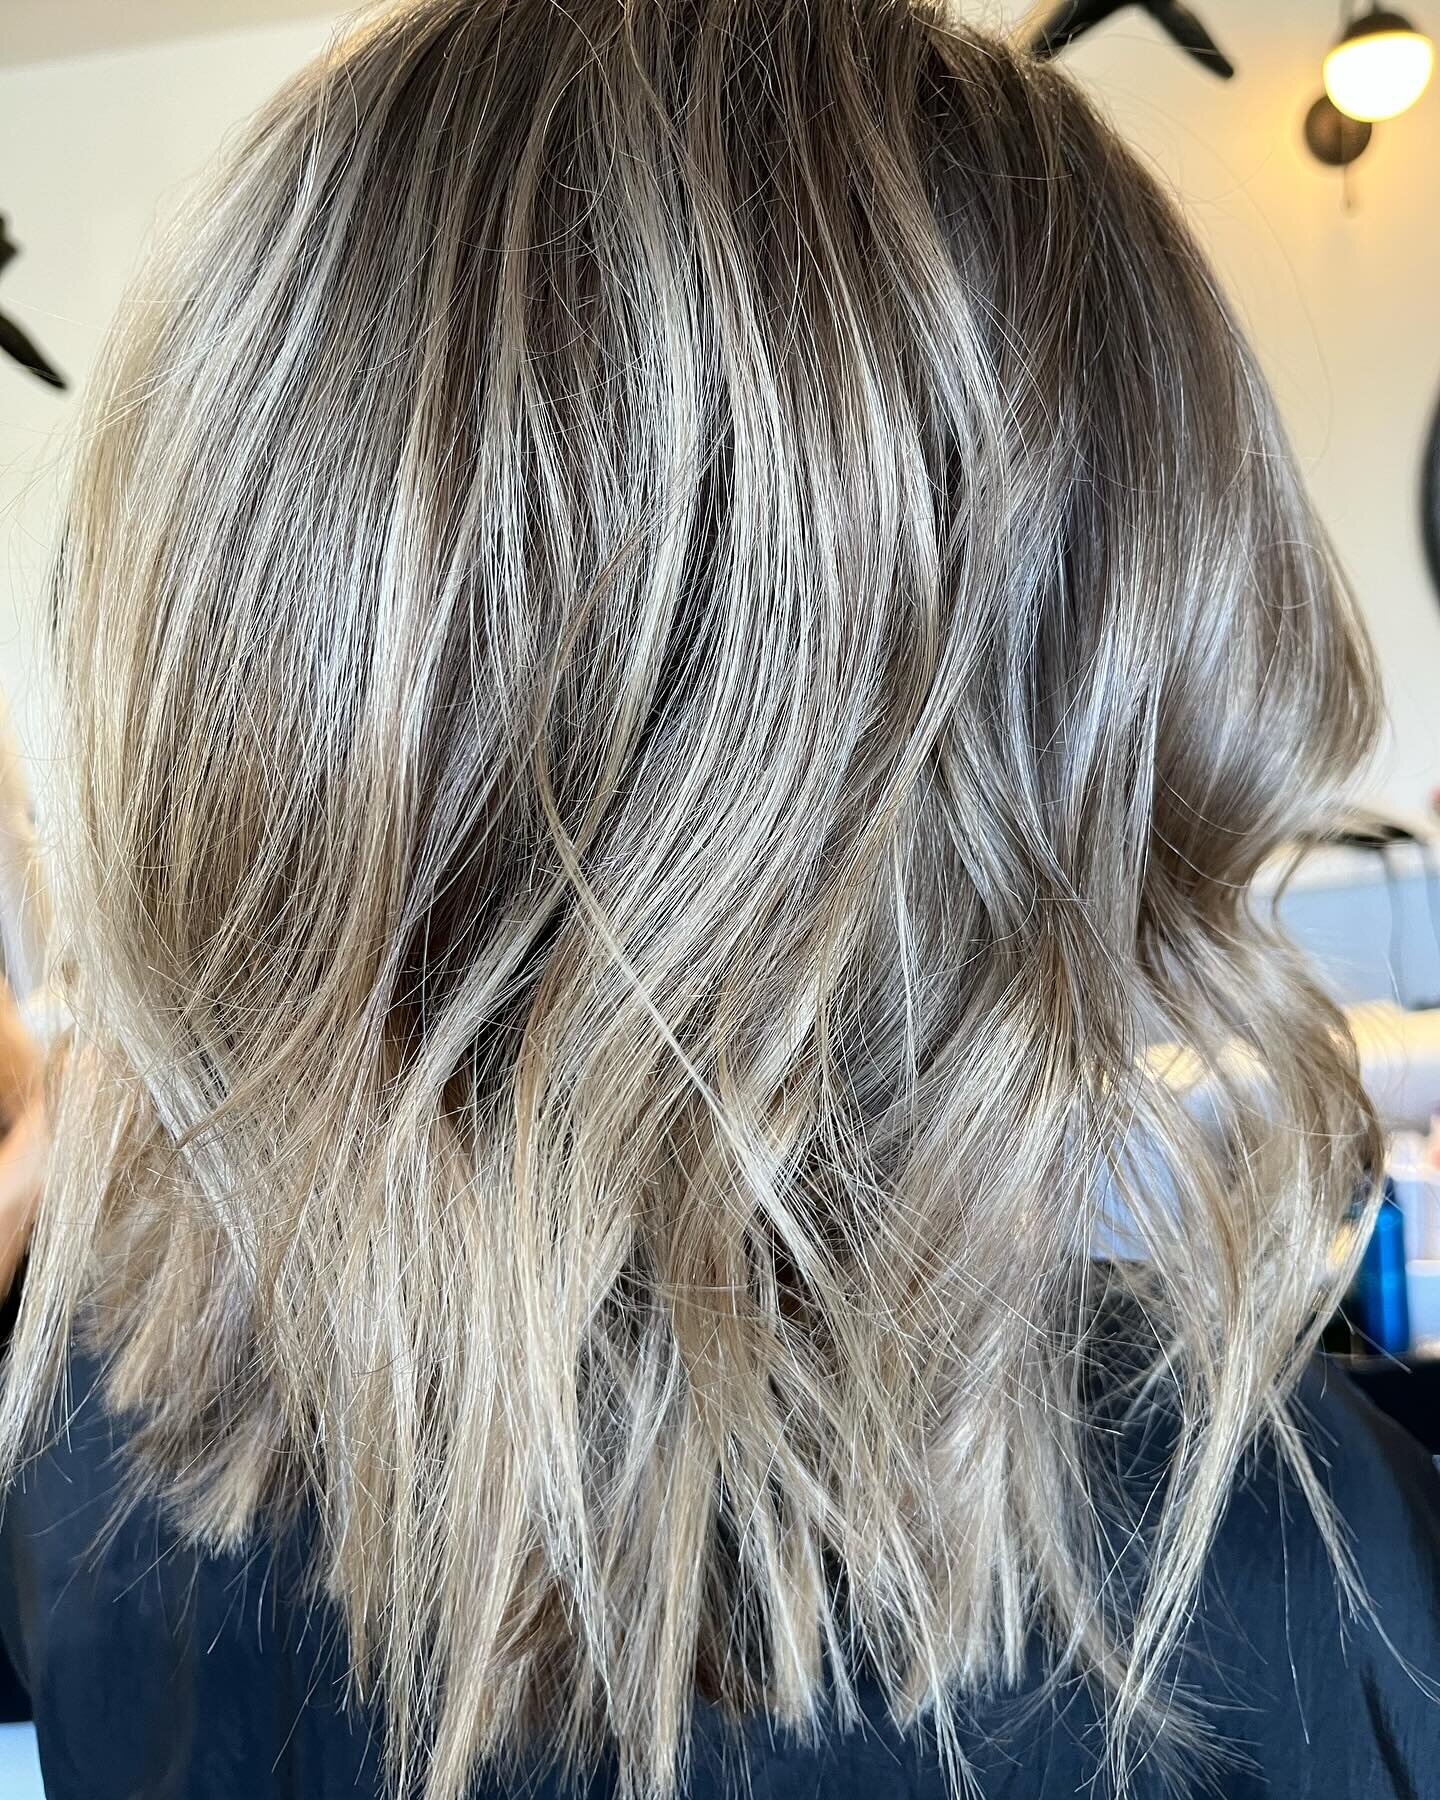 Styled with #paulmitchell #neurosmooth and express gold curl 1&rdquo; for that movement and texture 💫
We love showing our guests how to recreate their look at home 🫶🏻